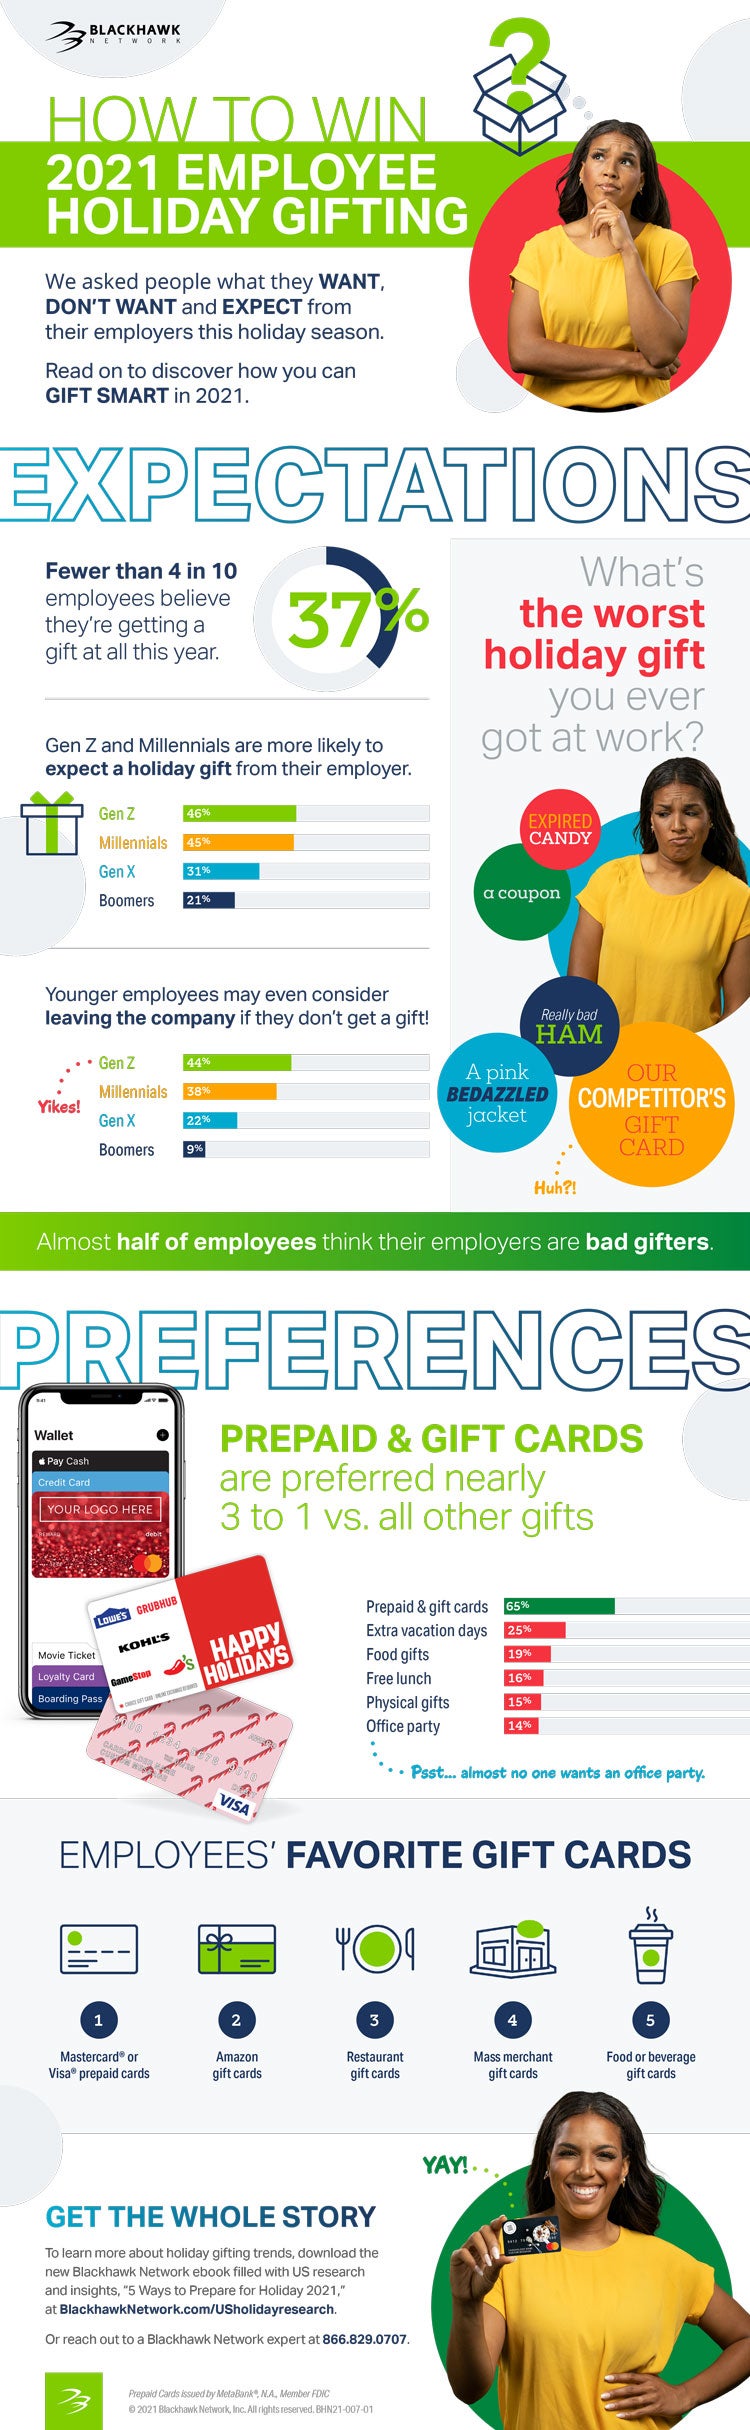 Infographic: How to Win 2021 Employee Holiday Gifting